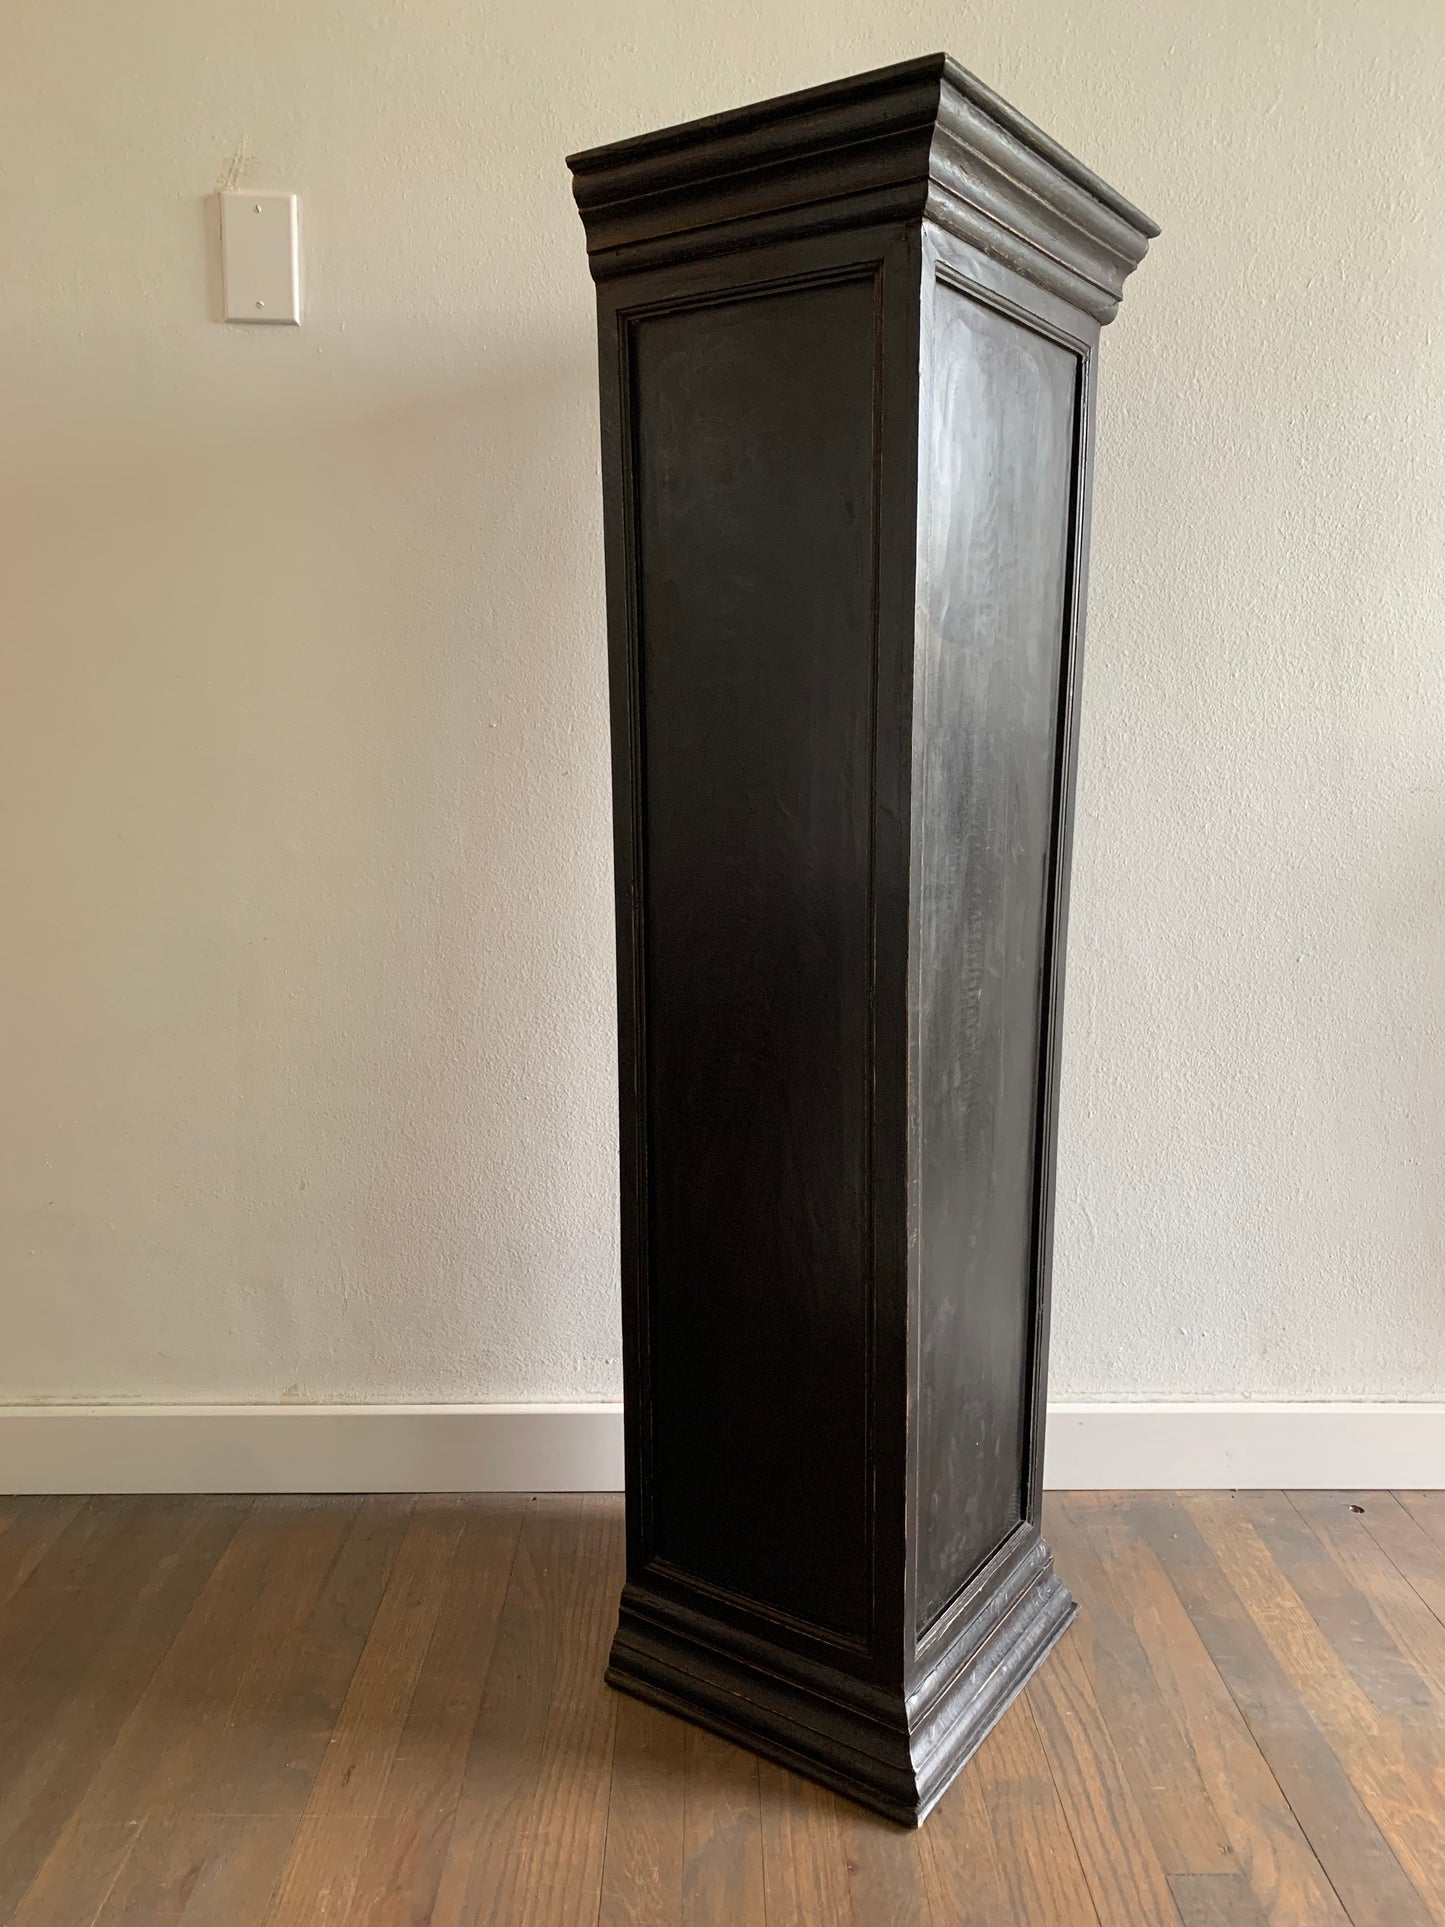 Early 21st Century Neoclassical Architectural Element Column Pedestal